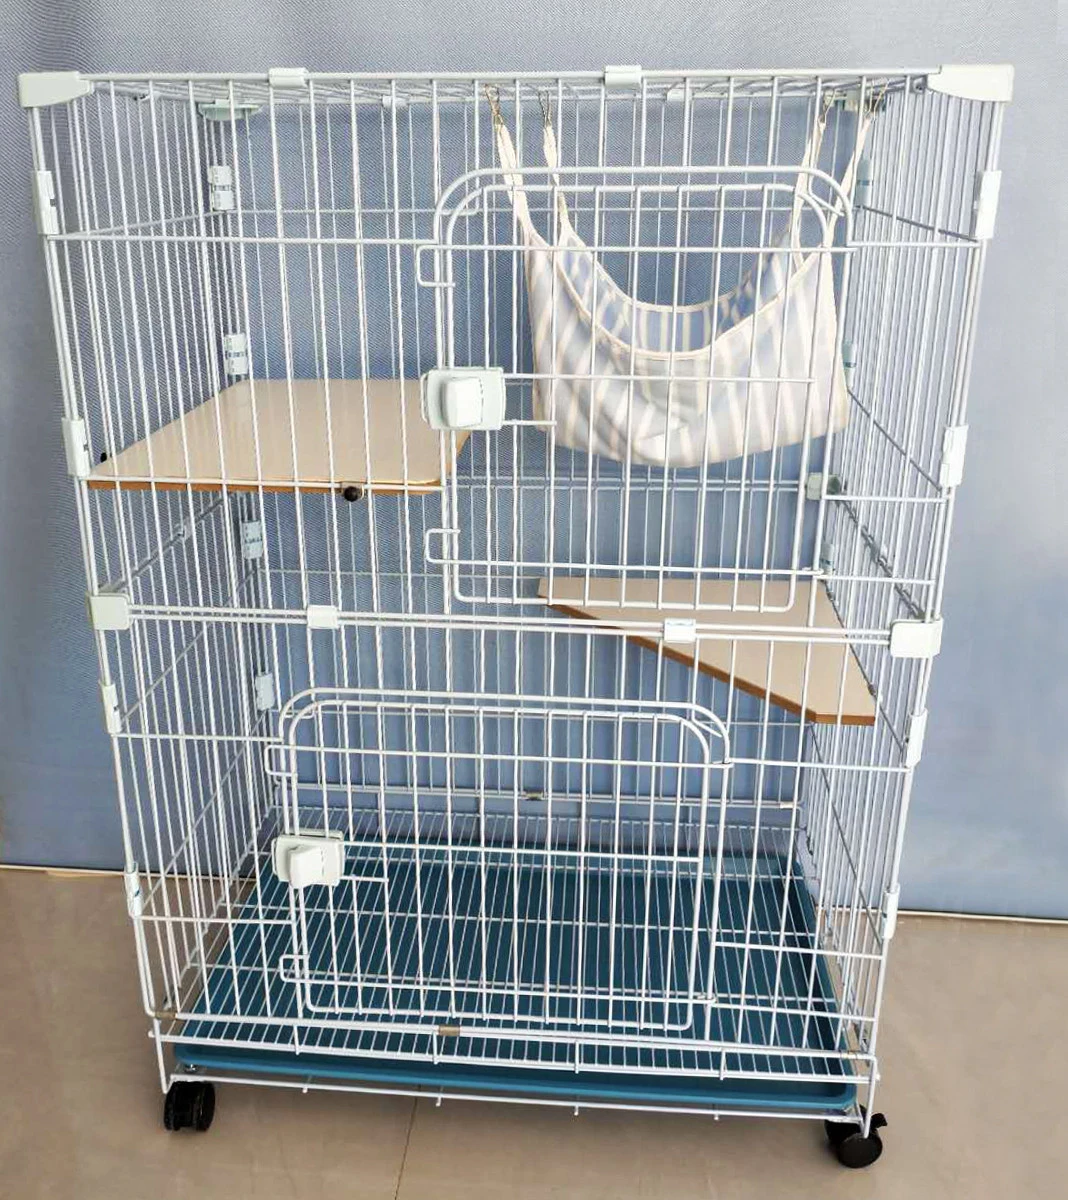 WT902 High Quality Cat Cattery Large 2 layers pet Cat Cage Veterinary Breathable Cat Cages